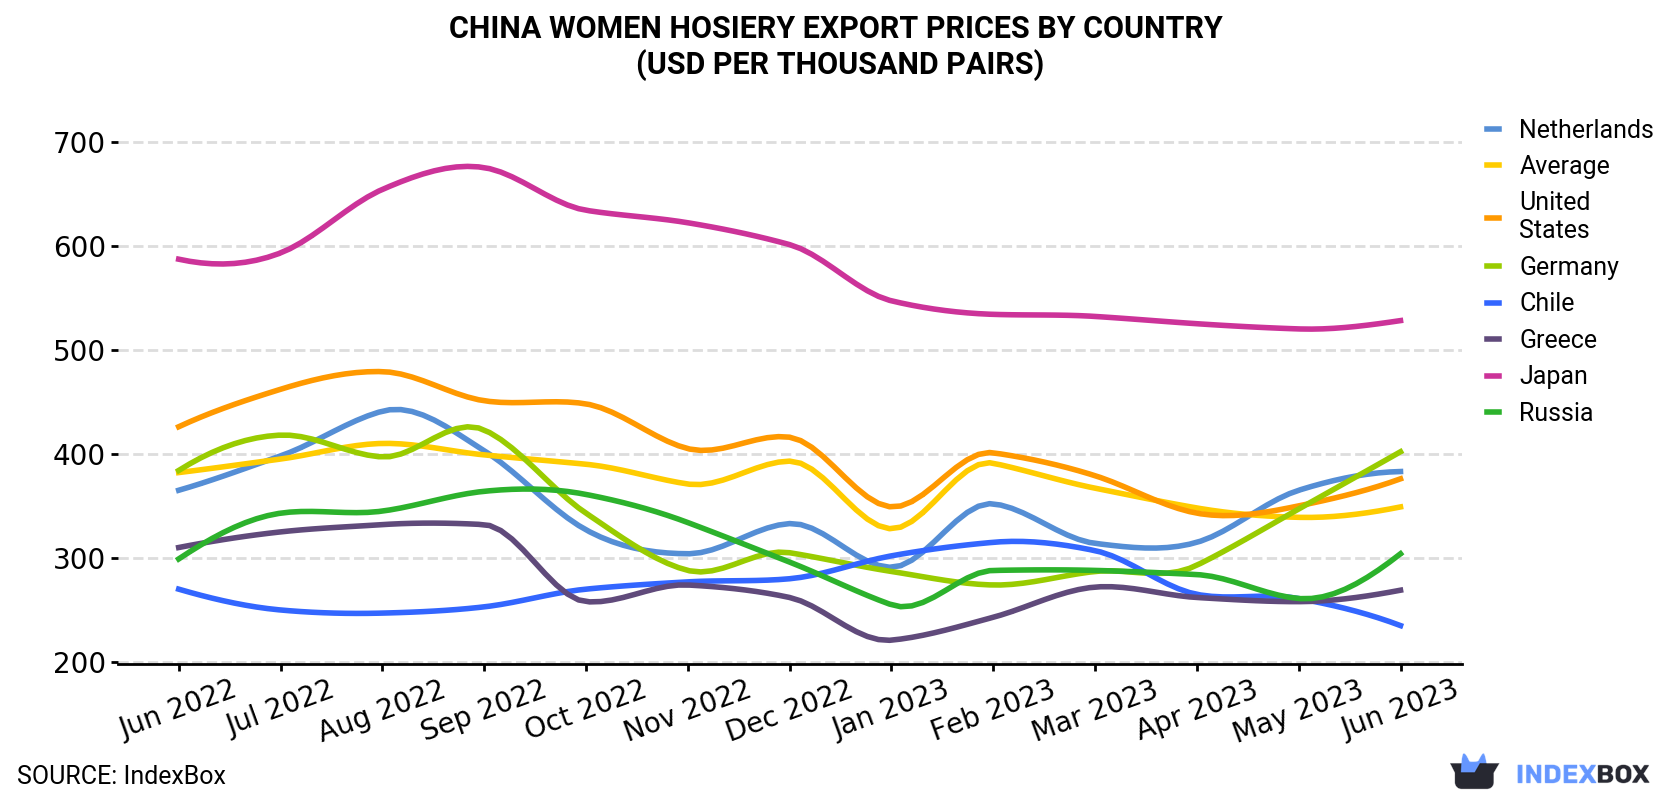 China Women Hosiery Export Prices By Country (USD Per Thousand Pairs)